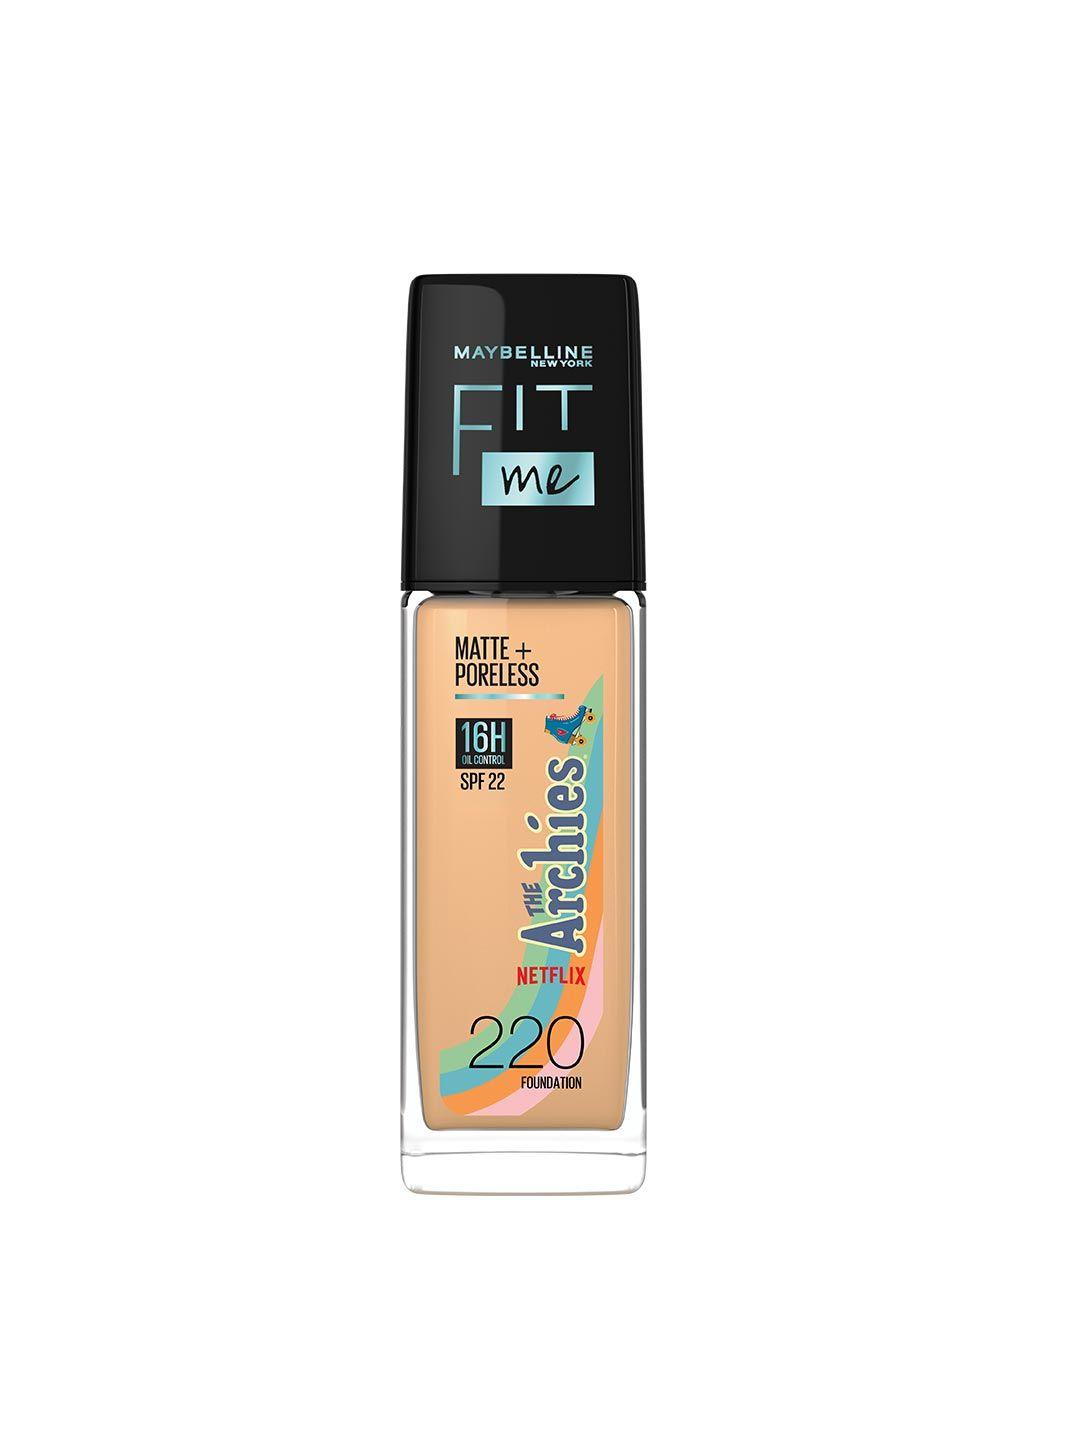 maybelline-new-york-the-archies-collection-fit-me-matte+poreless-foundation-30ml-shade-220